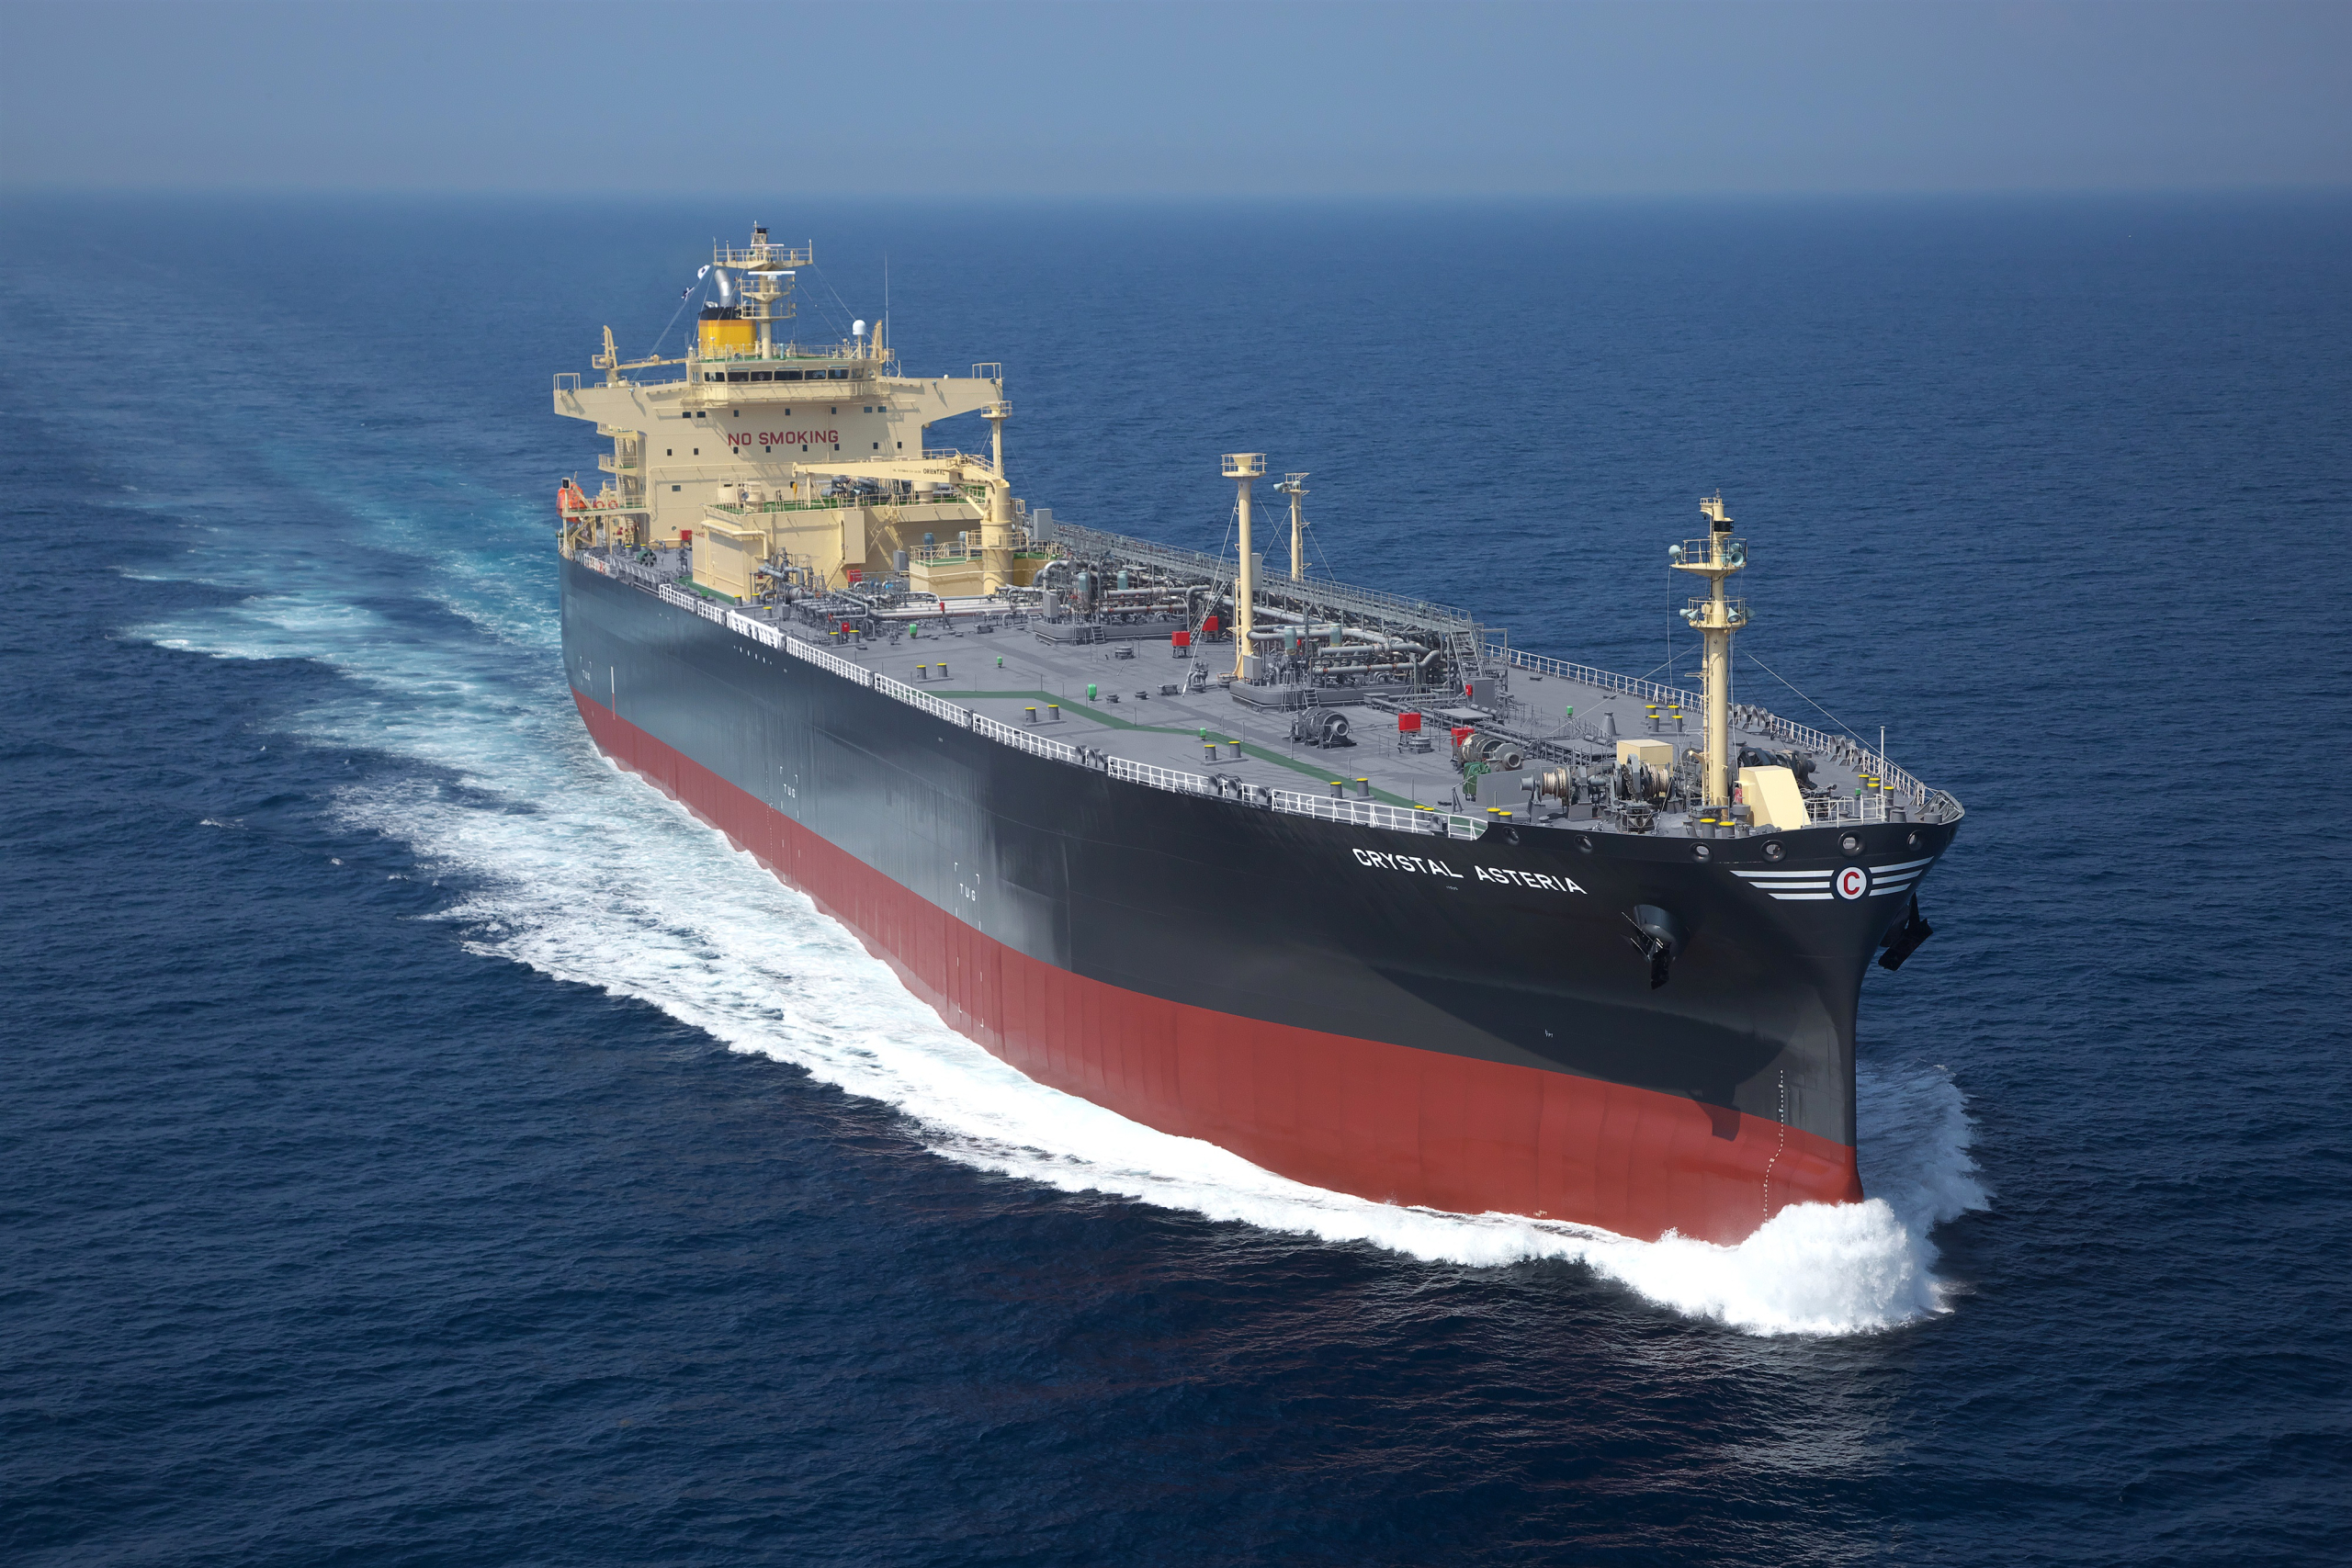 Building upon our technology readiness and expertise to adopt alternative fuels for greener shipping